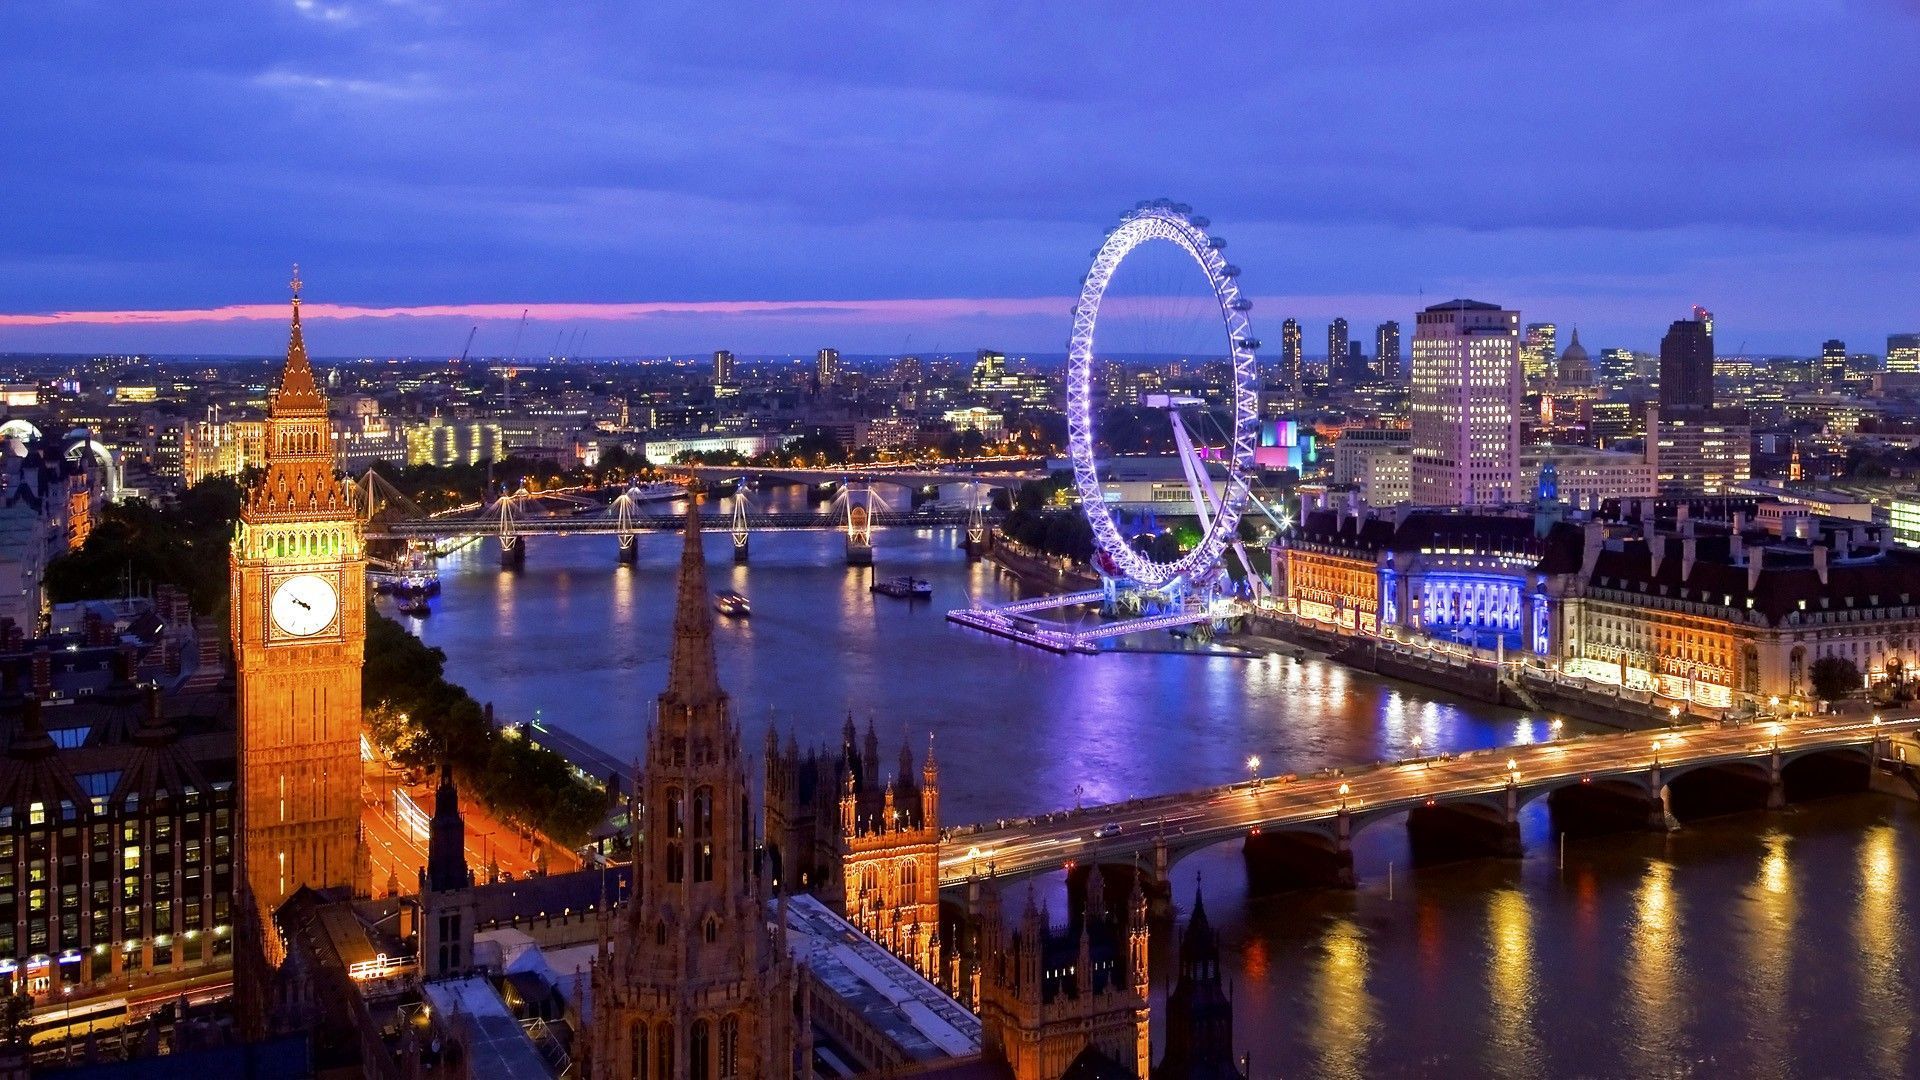 HD Wallpapers Of London